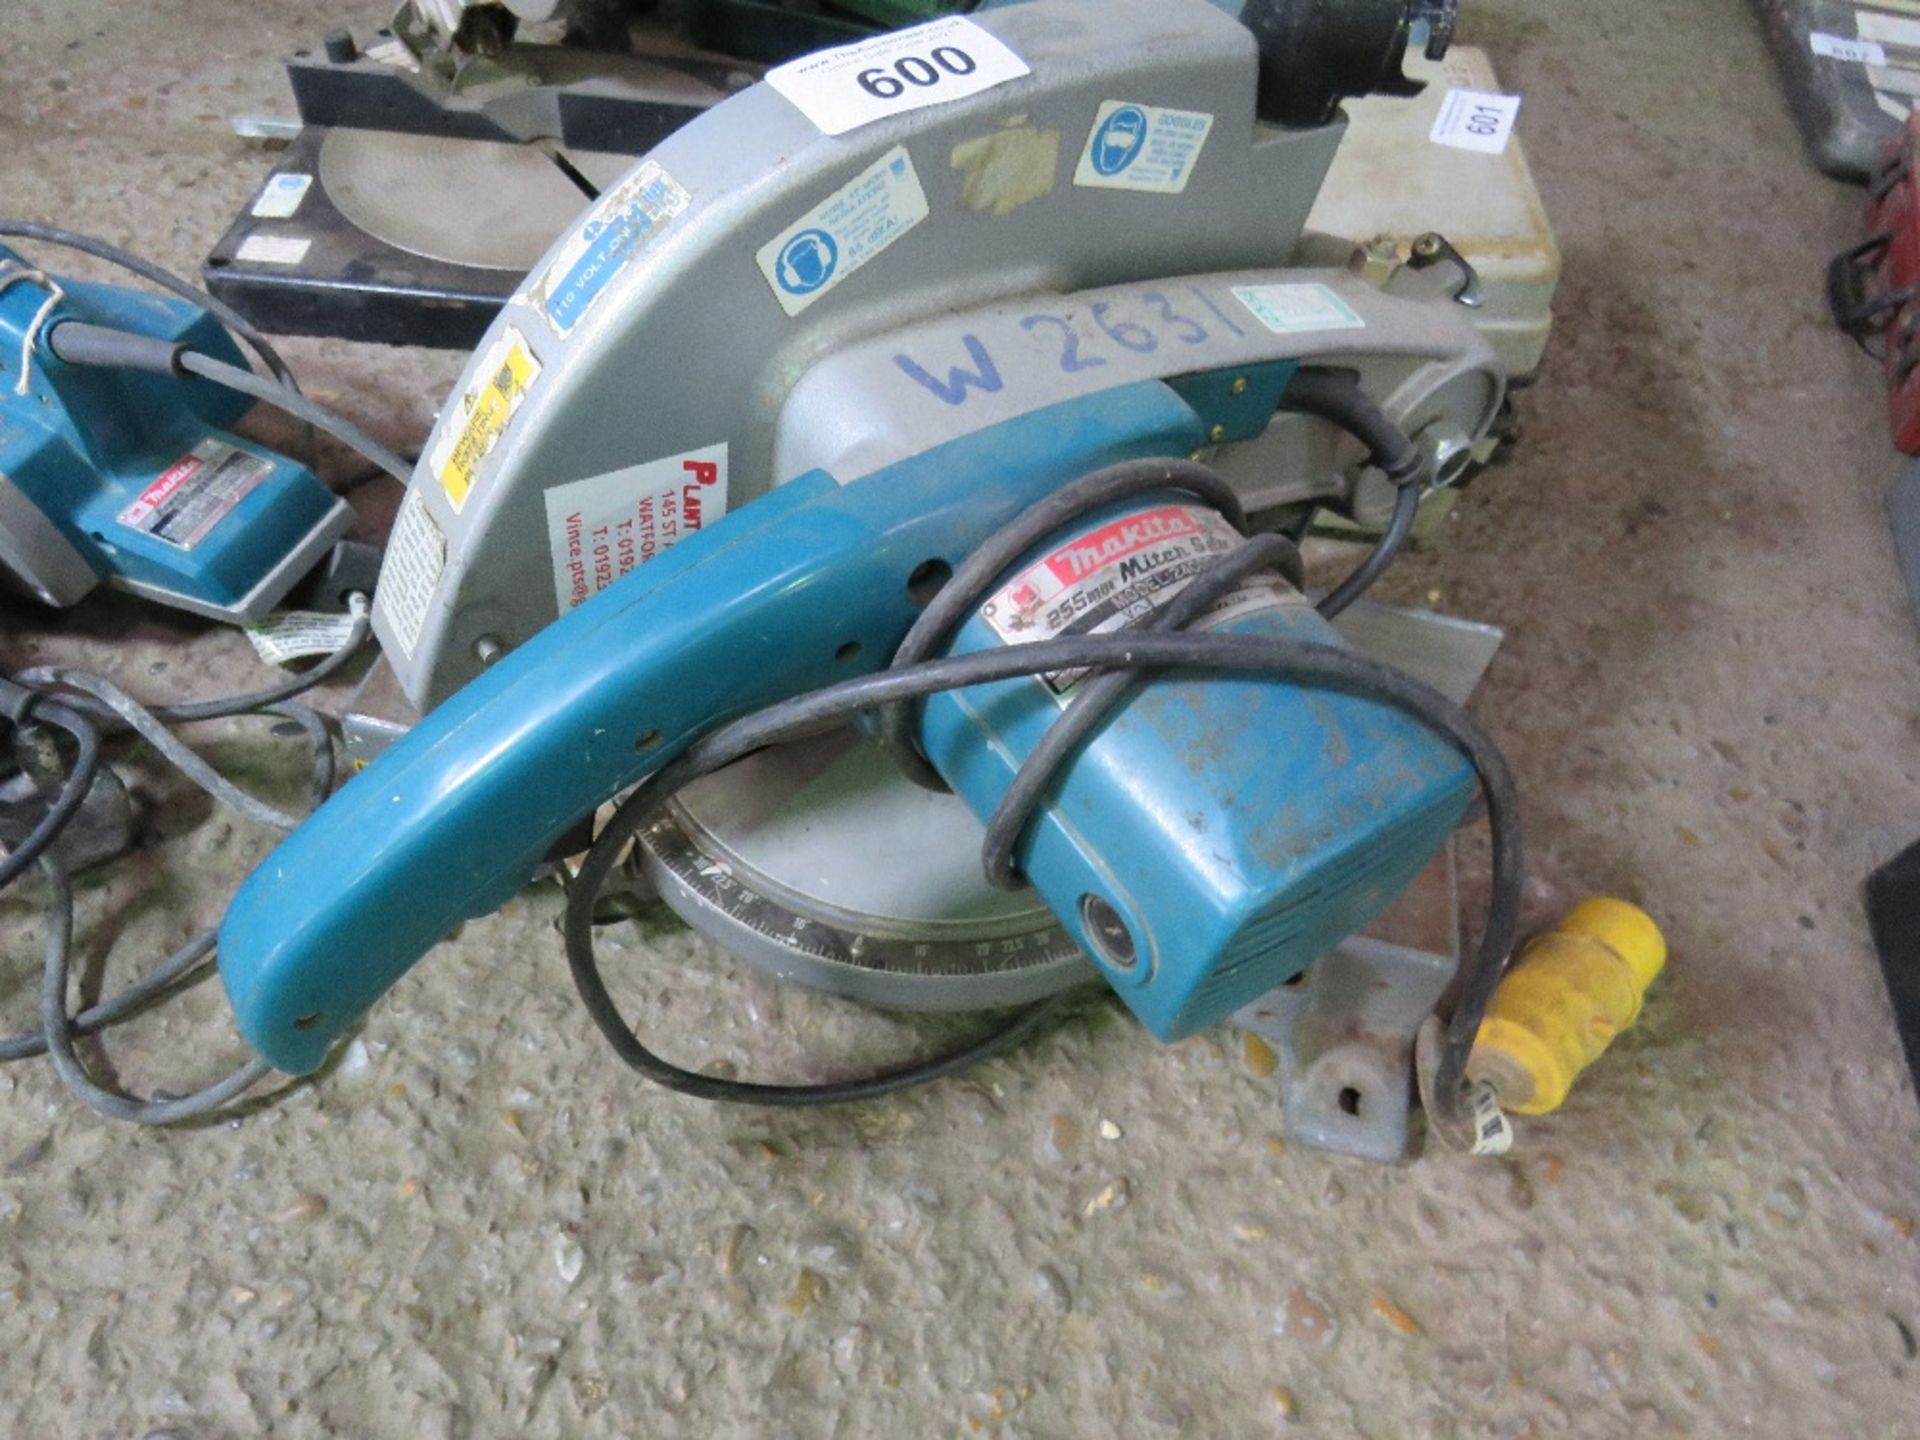 MAKITA 110V CROSS CUT MITRE SAW SOURCED FROM DEPOT CLEARANCE.